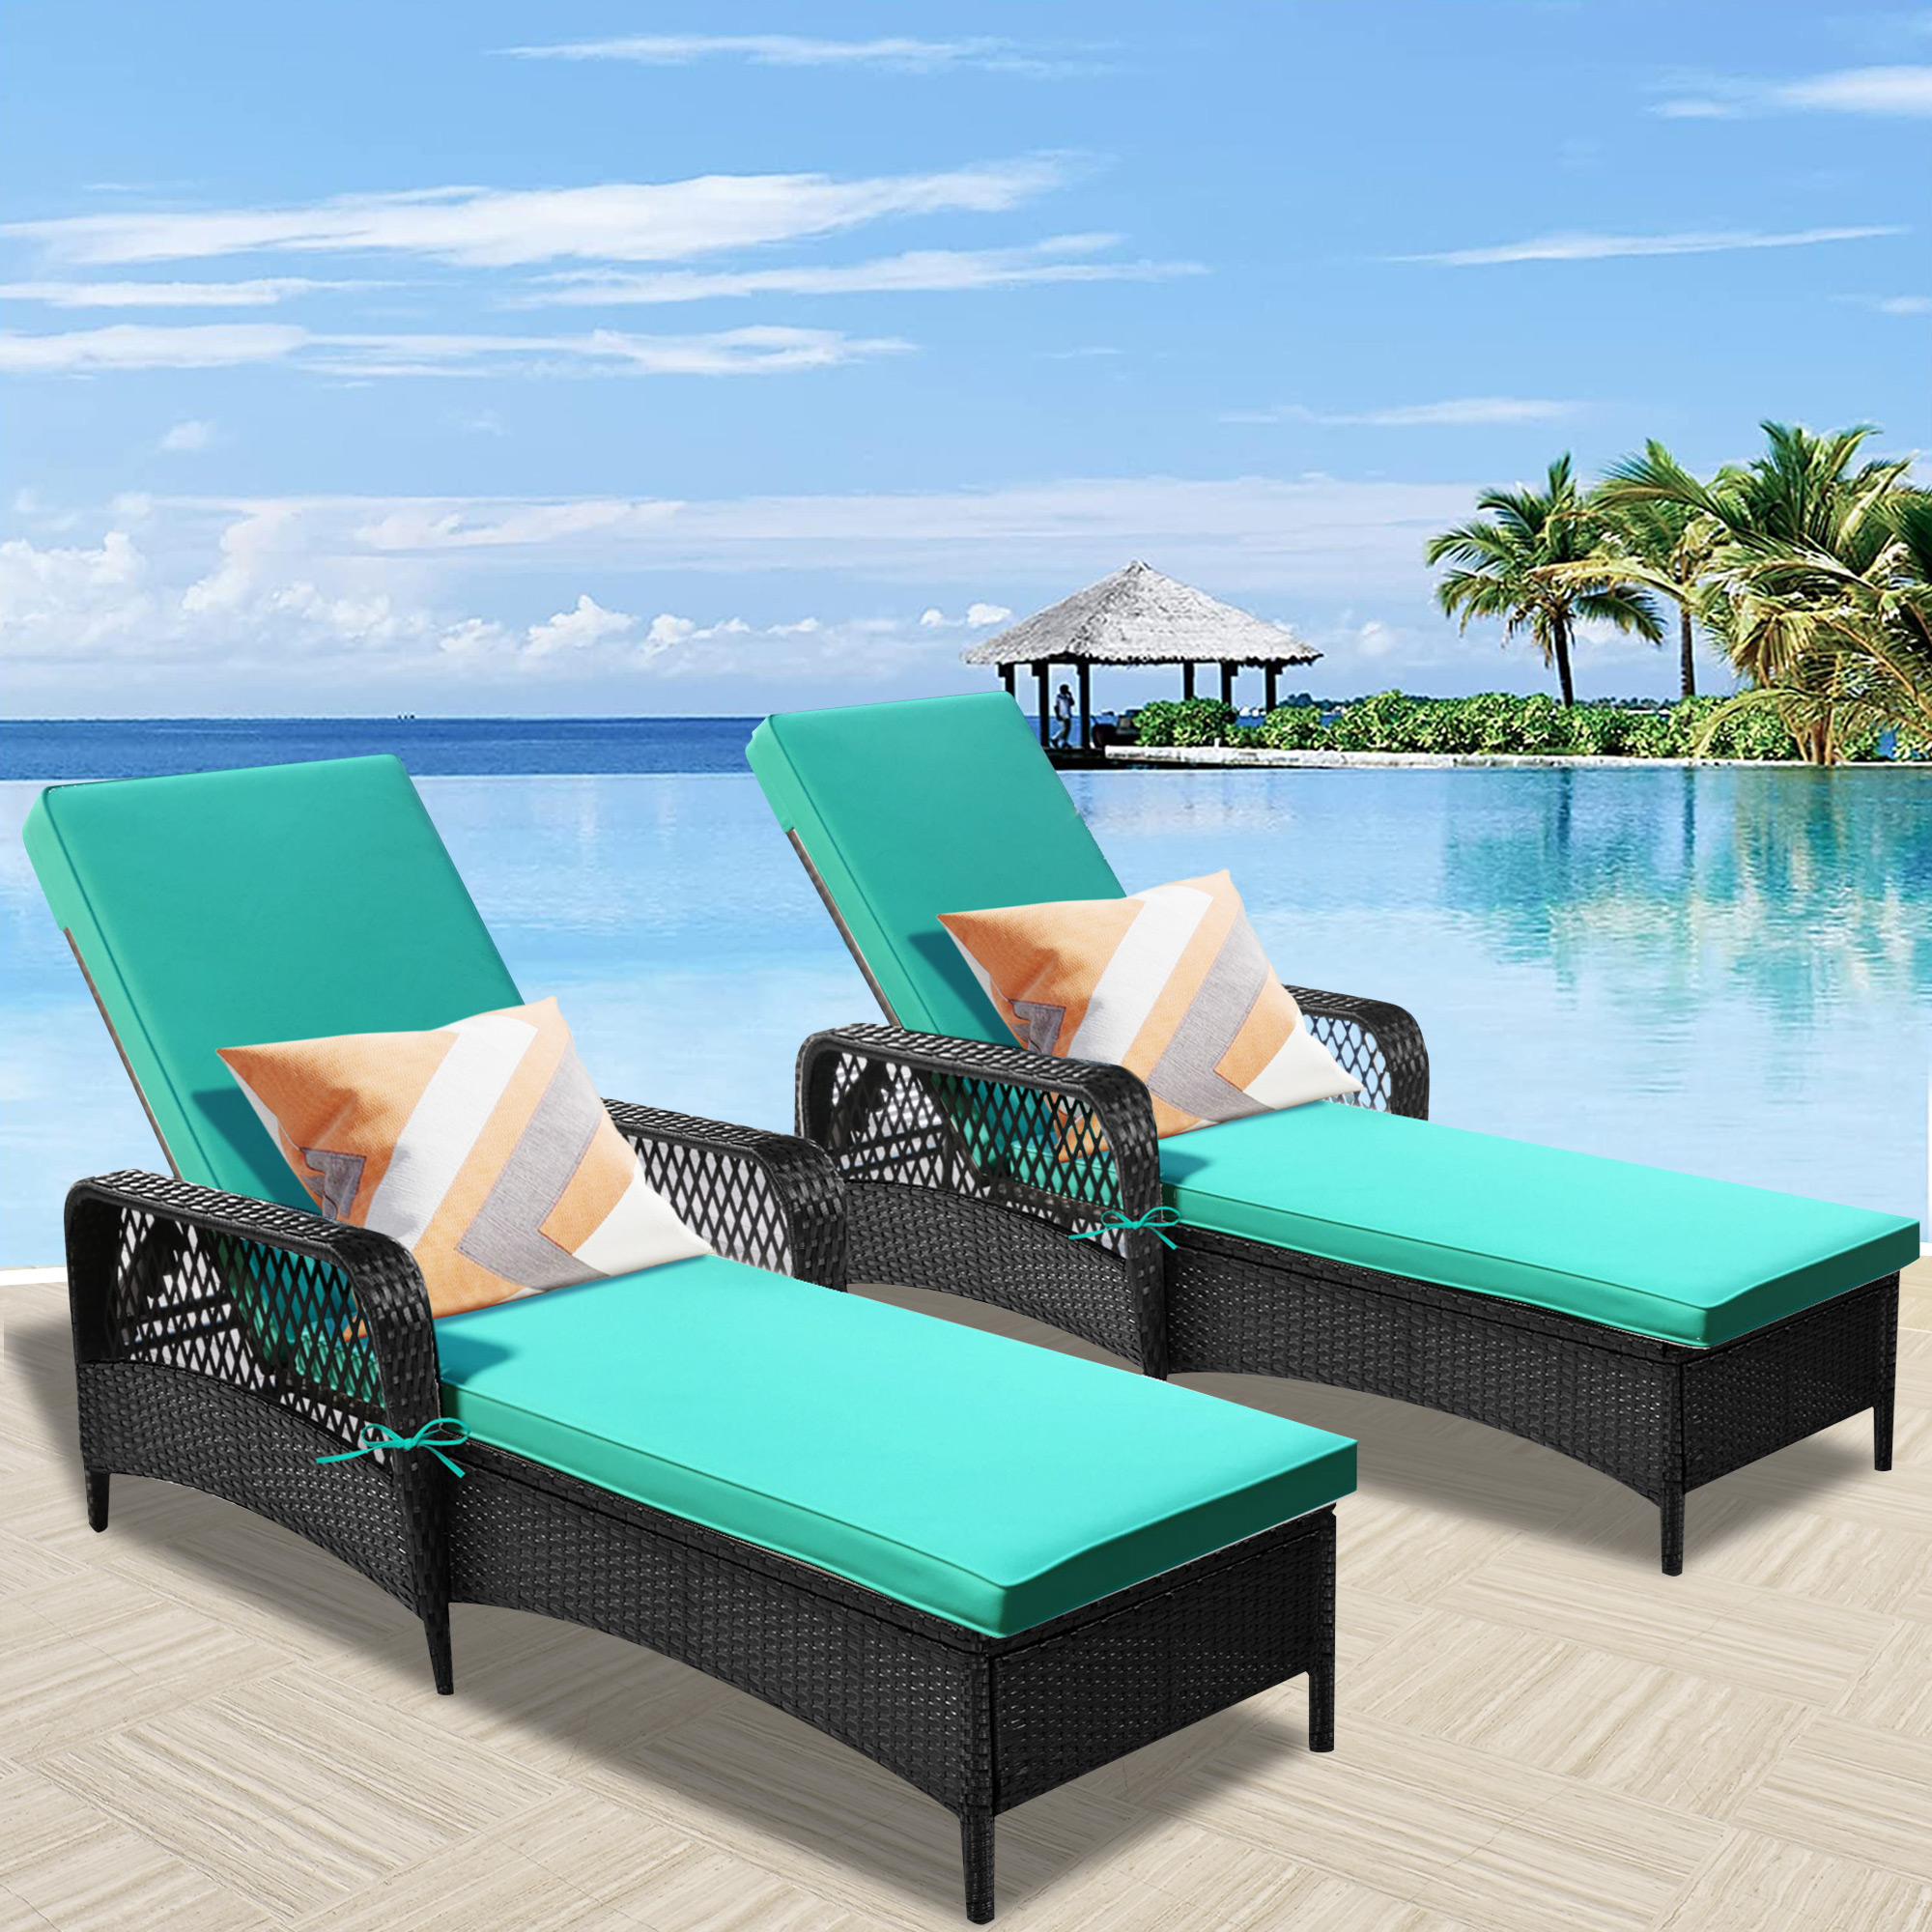 SYNGAR Outdoor Chaise Lounge Chairs, Patio Reclining Sun Lounger, PE Wicker Rattan Adjustable Lounge Chair with Thickened Cushion, Reclining Chair for Poolside, Deck, Backyard, 2 Pack, Green - image 1 of 11